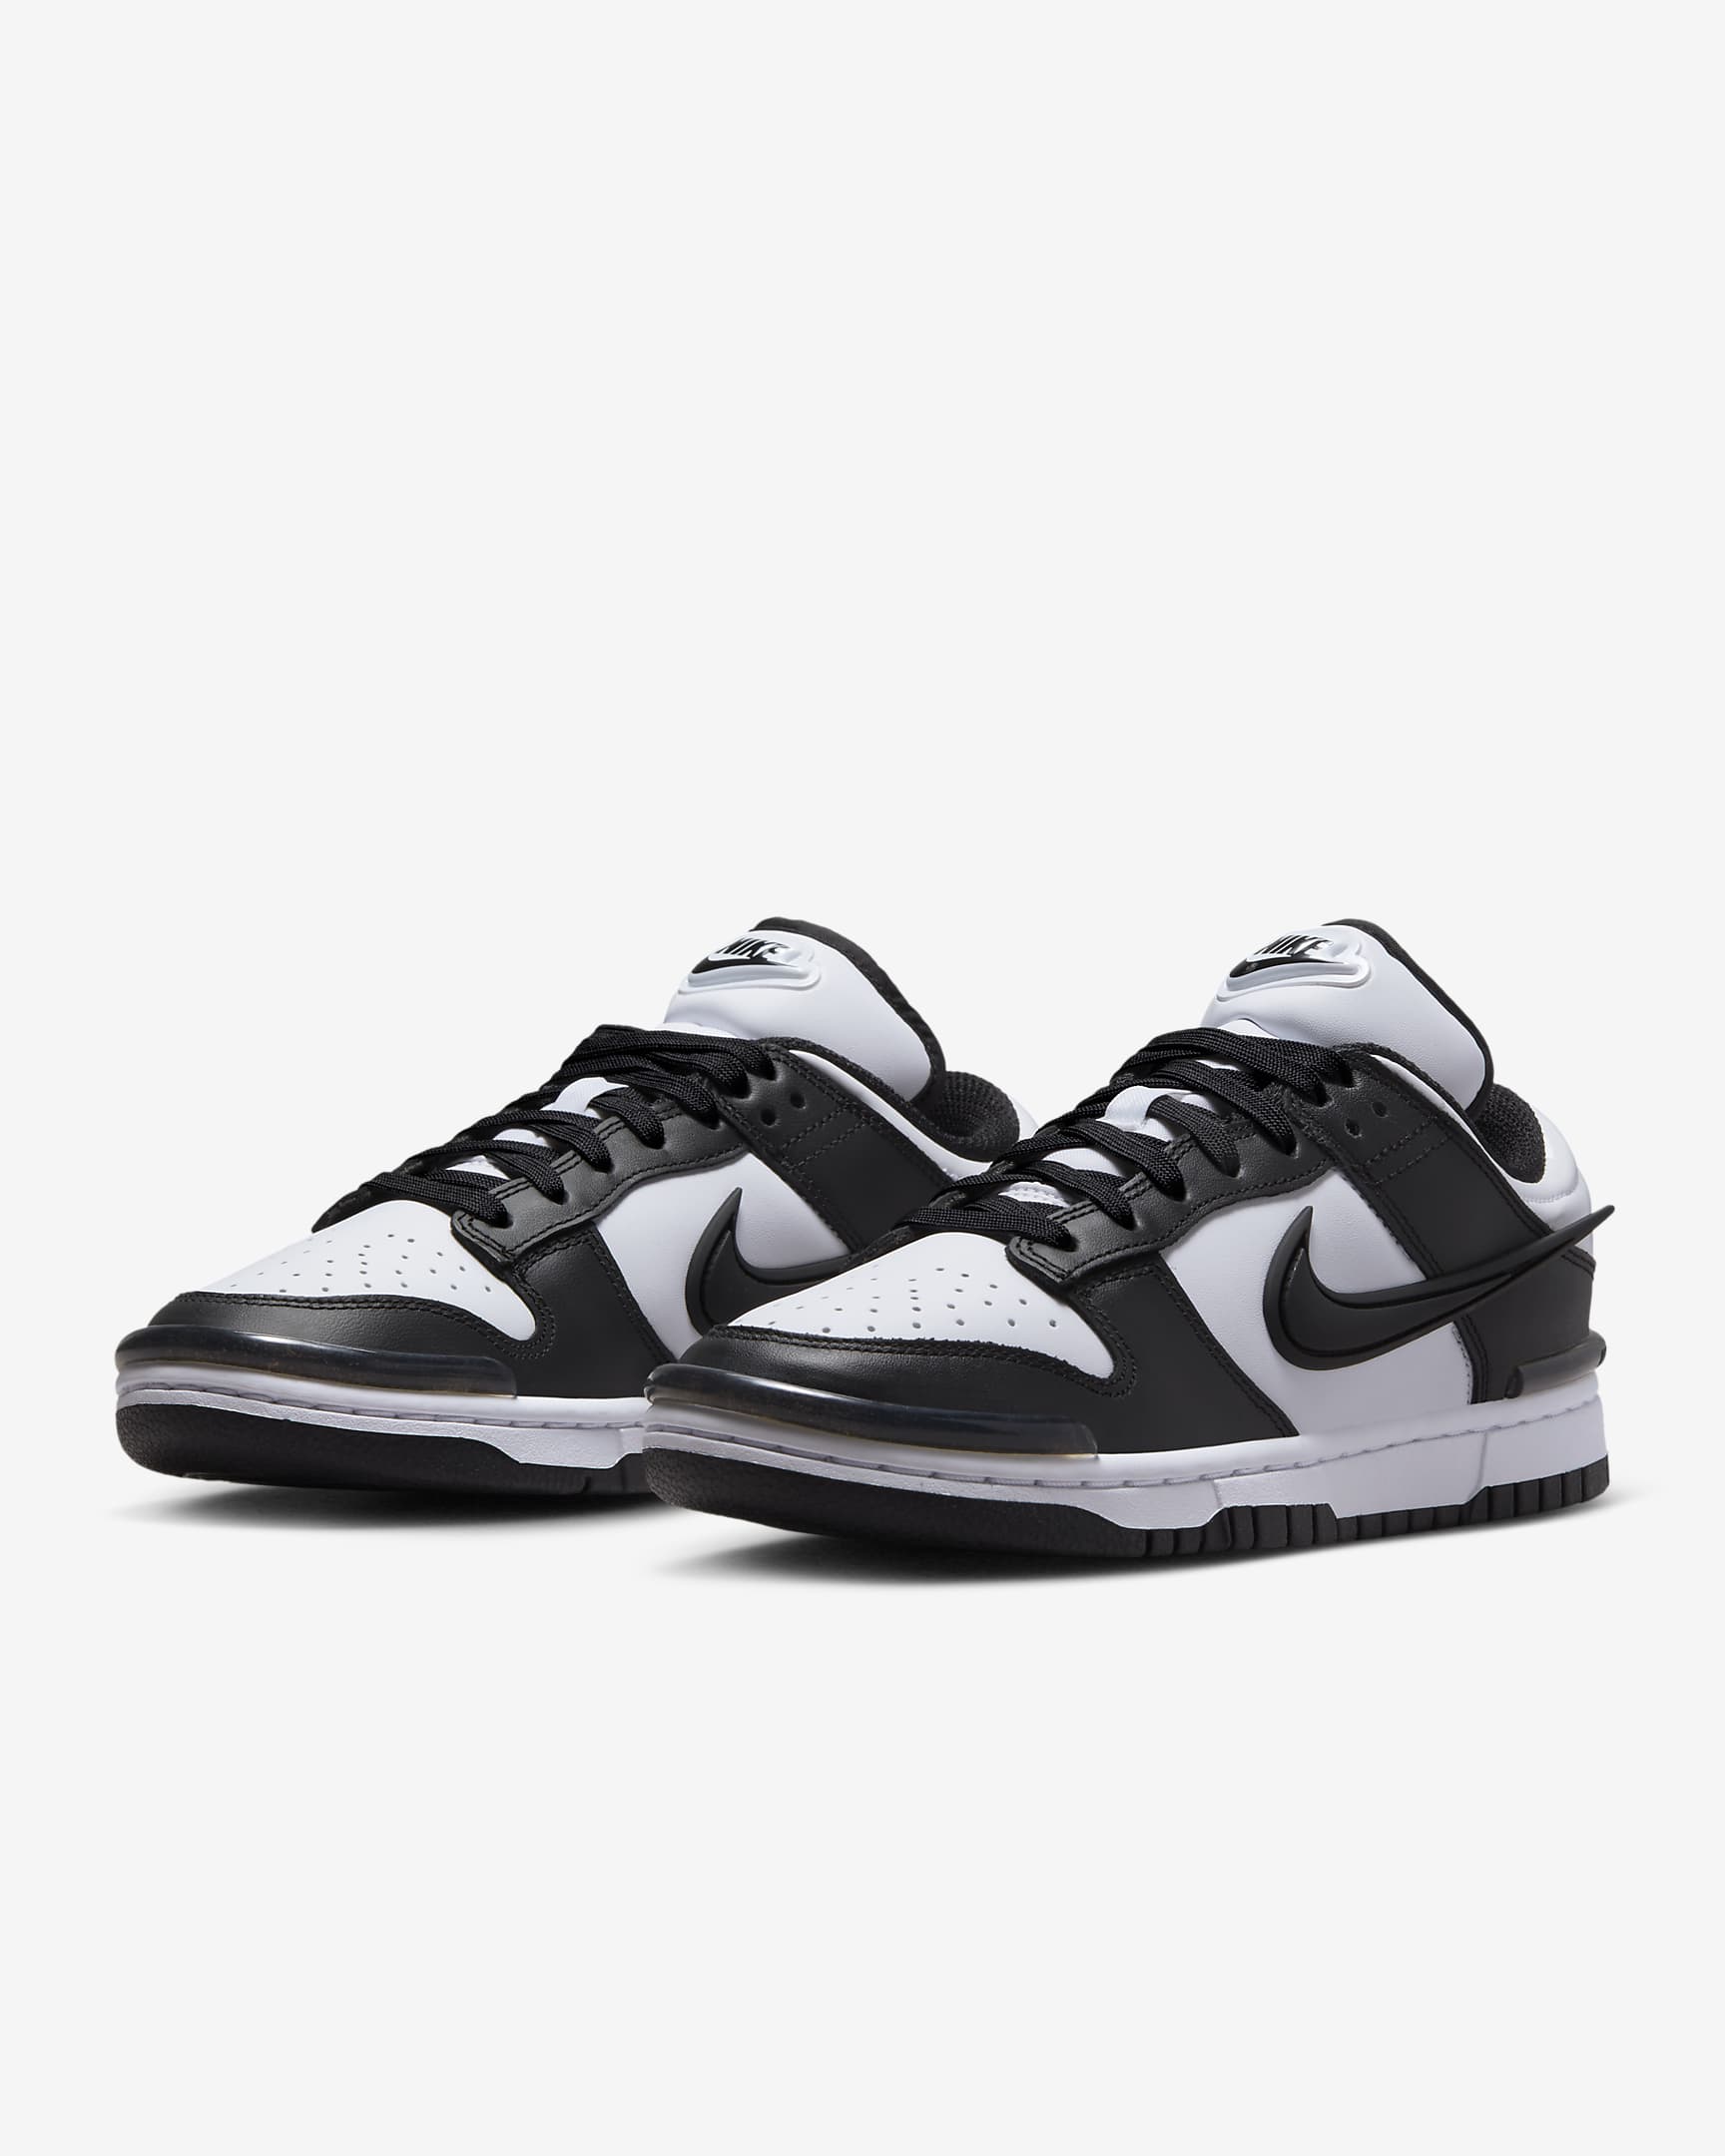 Twist and Shout: Nike Dunk Low Twist Women's Shoes Review Reveals All ...